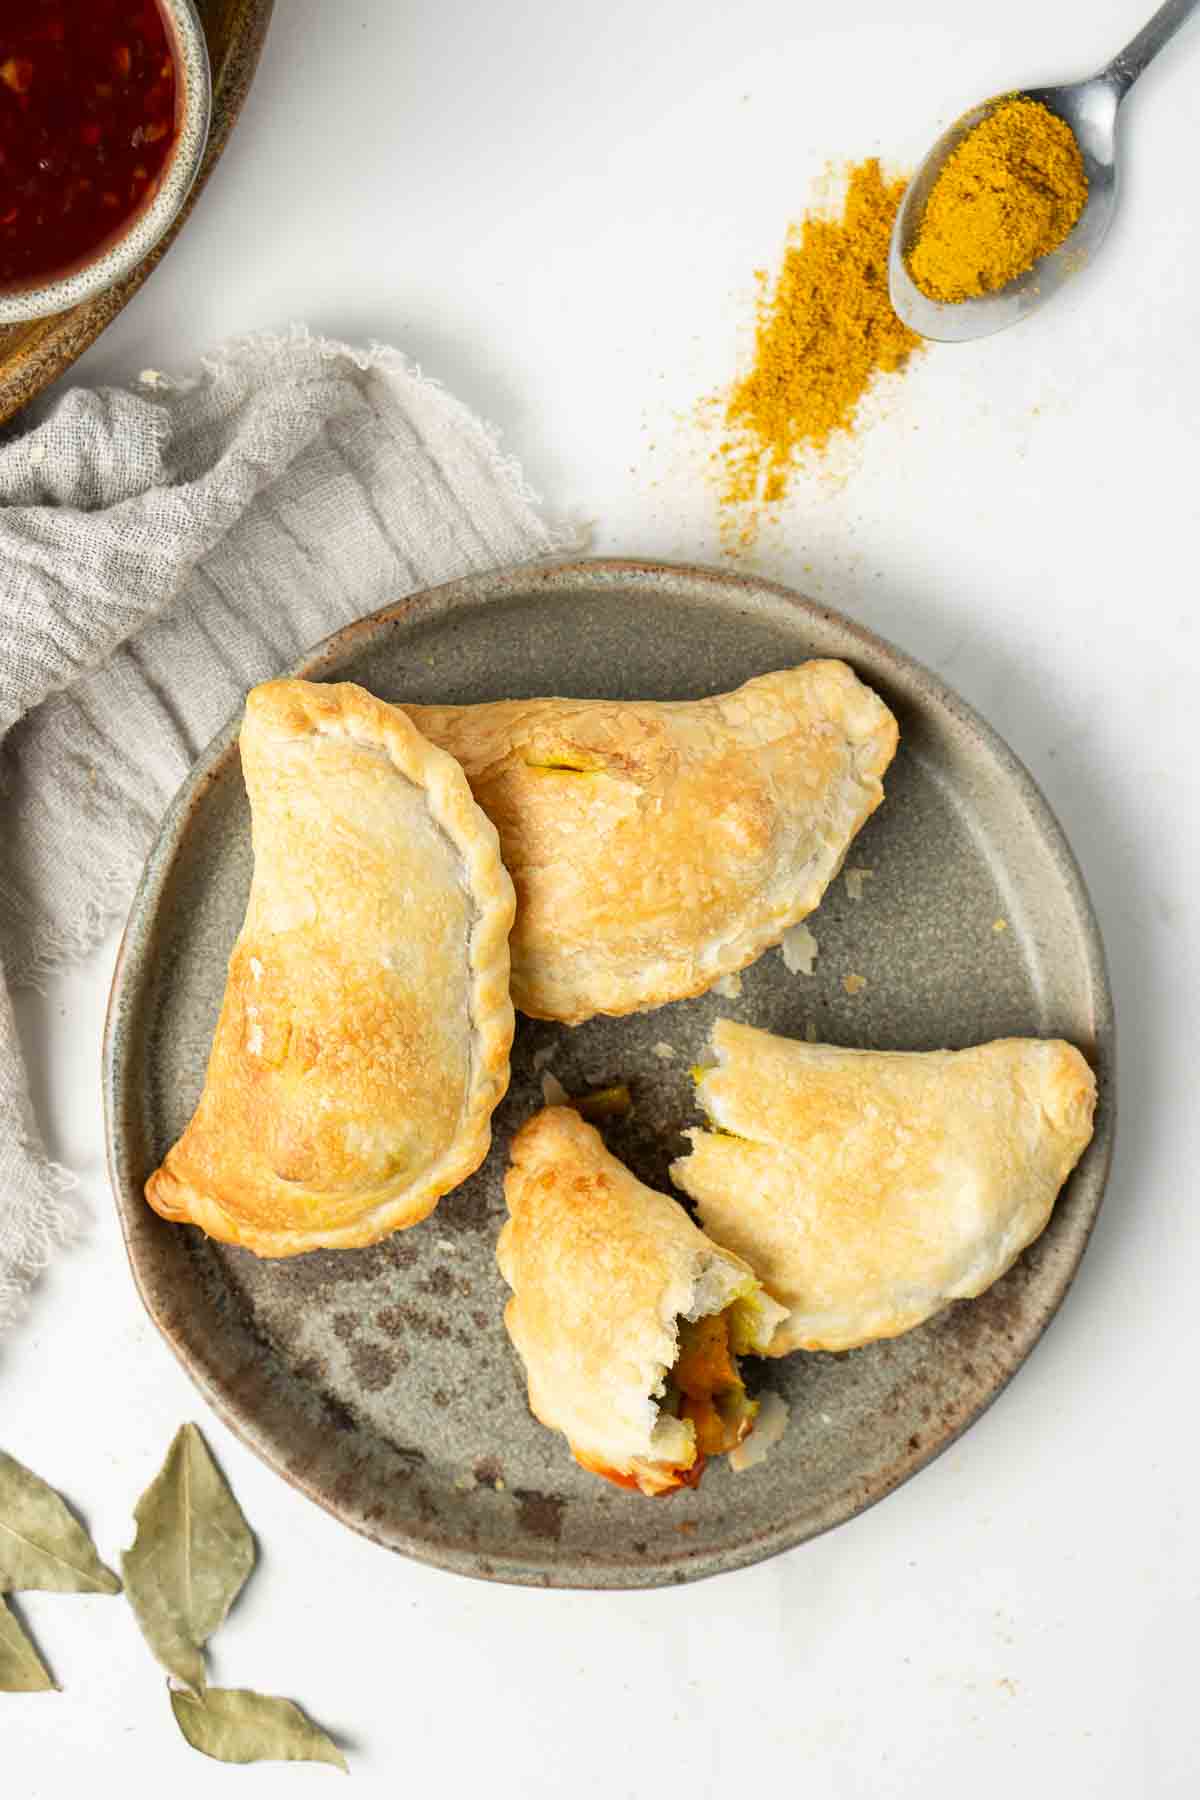 Curry puffs on a grey plate and a spoonful of curry powder.